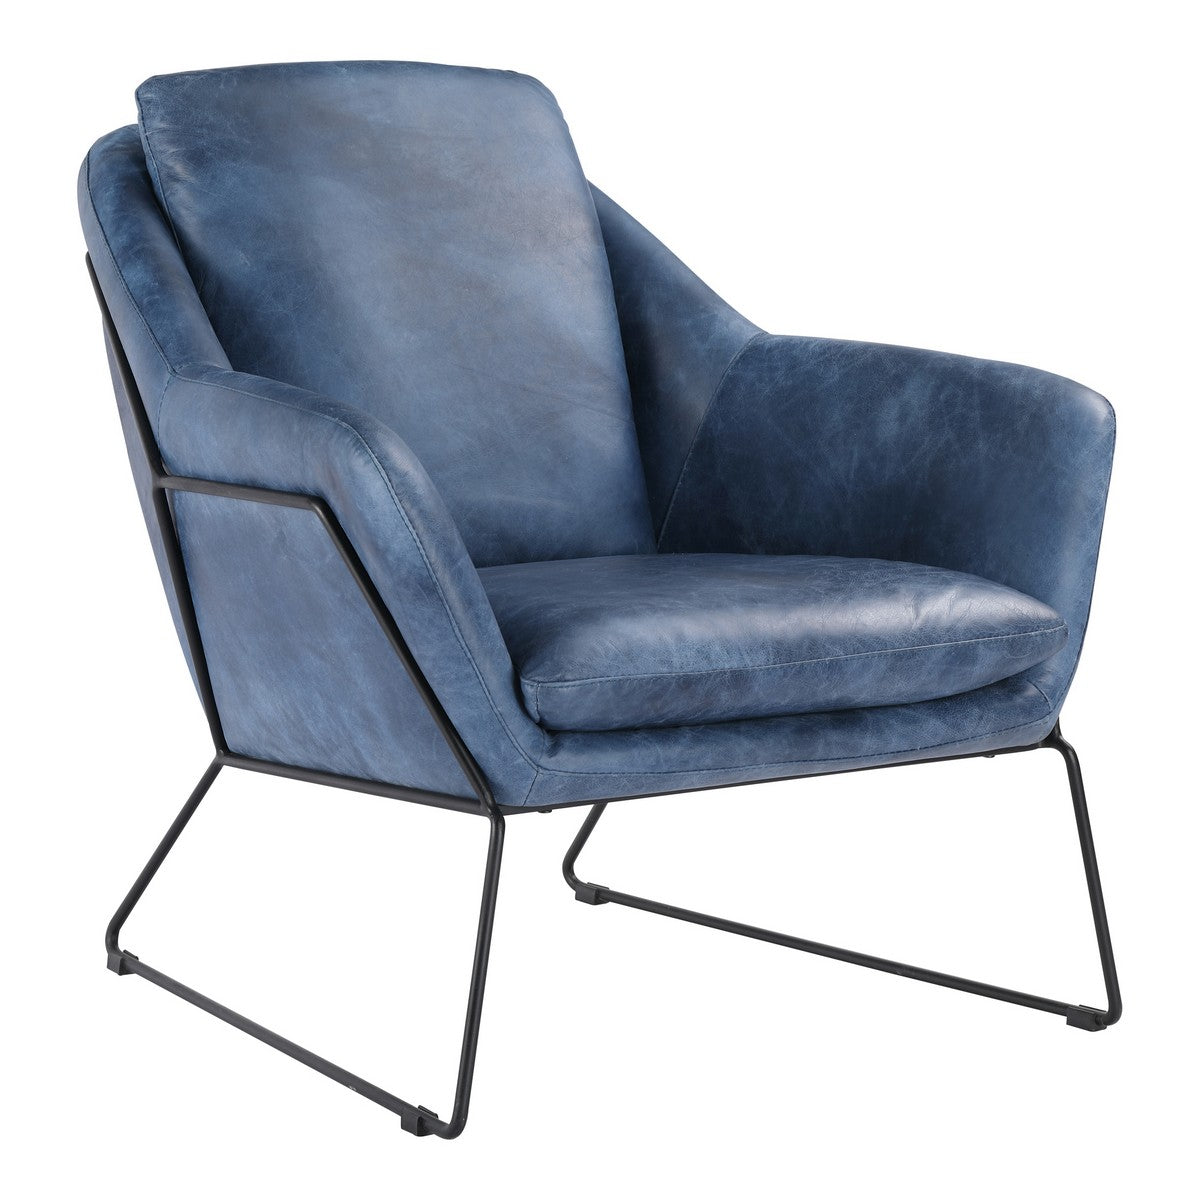 Moe's Home Collection Greer Club Chair Blue - PK-1056-19